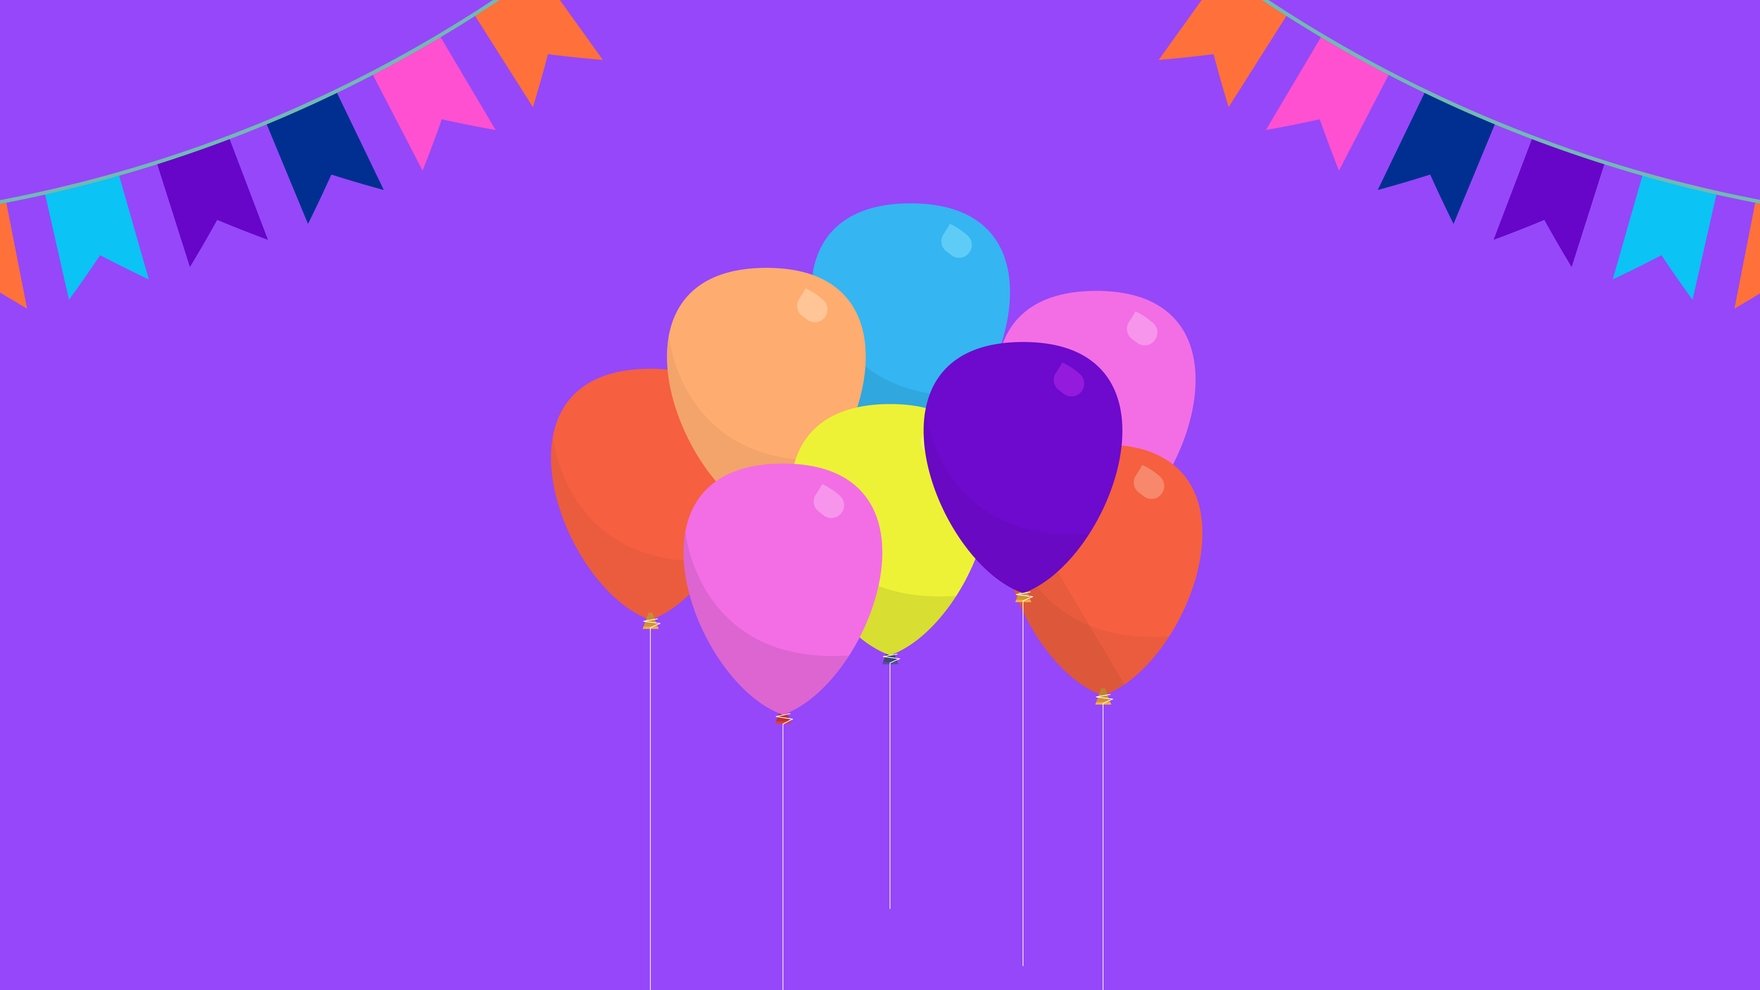 Free Birthday Party Background in Illustrator, EPS, SVG, JPG, PNG